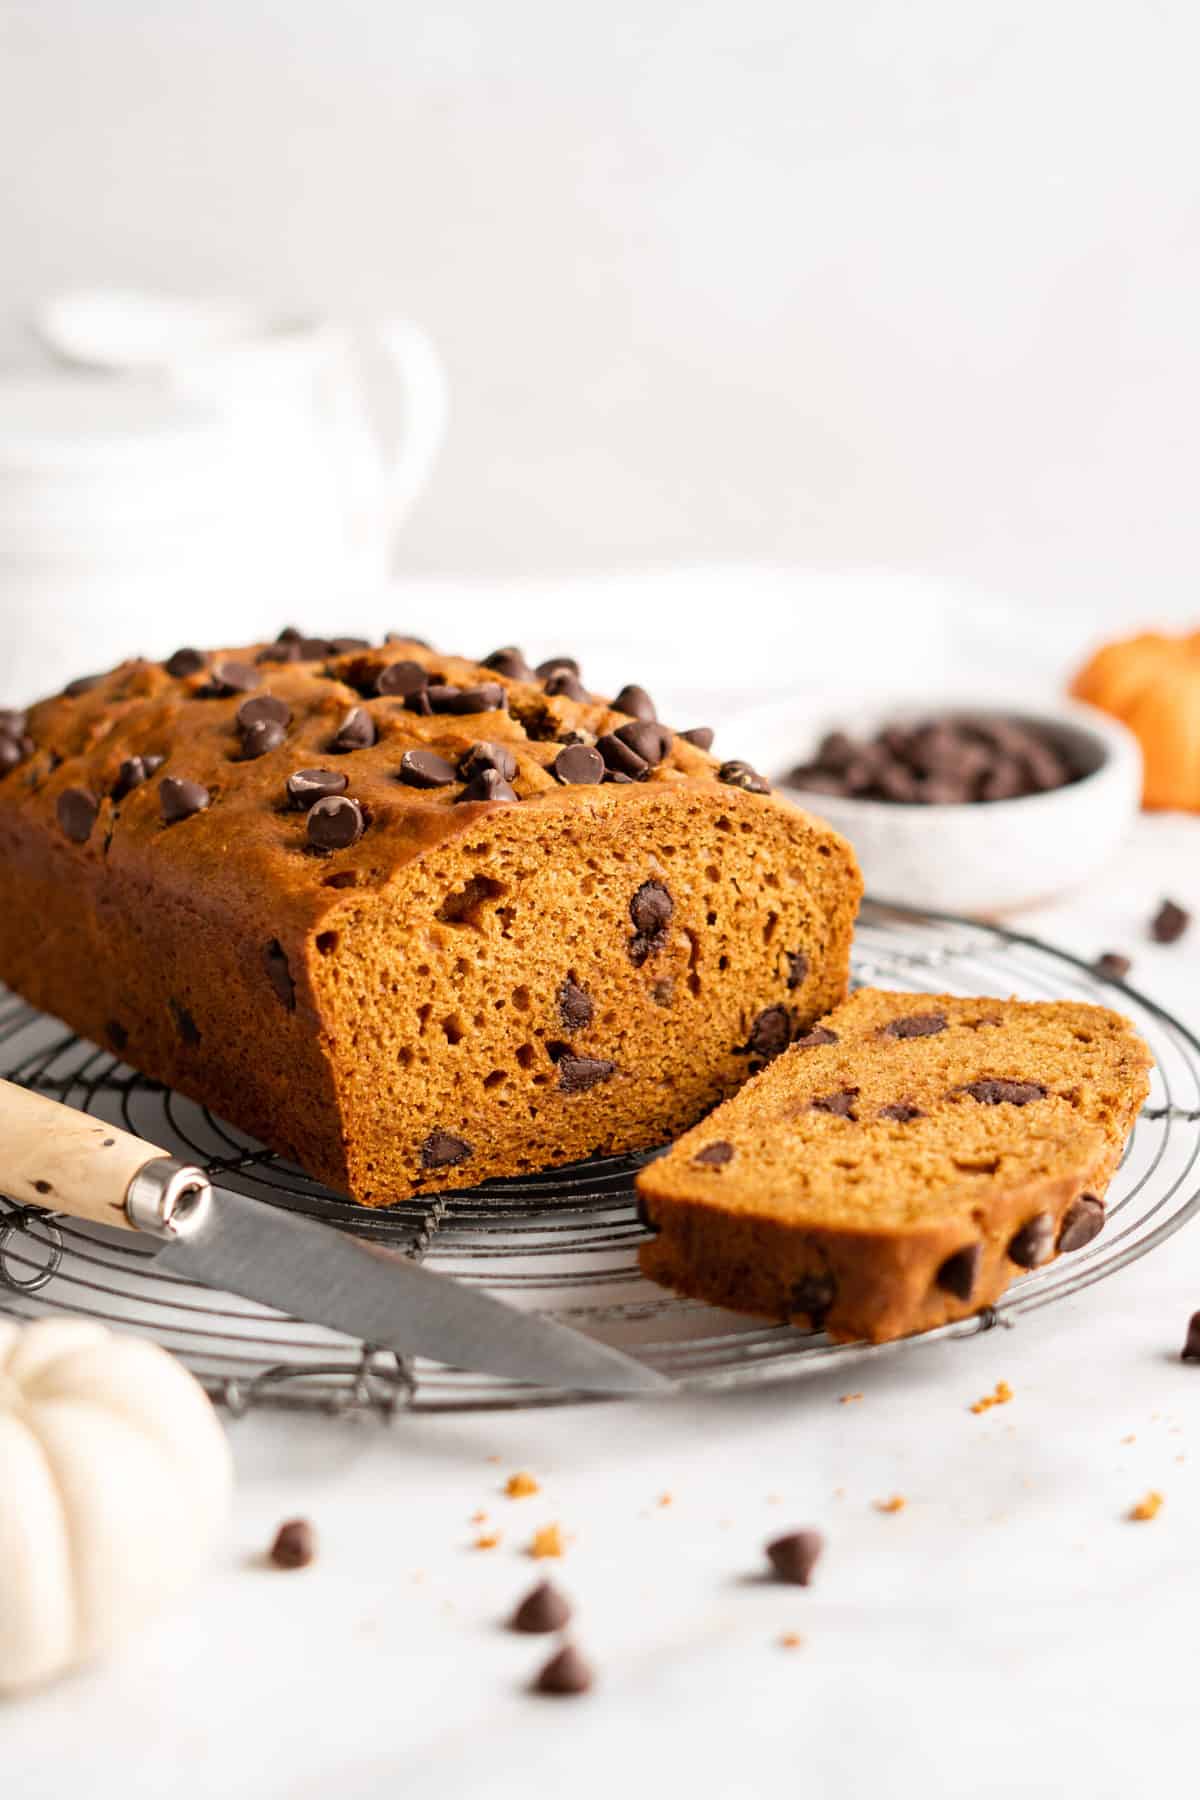 Loaf of pumpkin bread on cooling rack with knife, with one slice cut